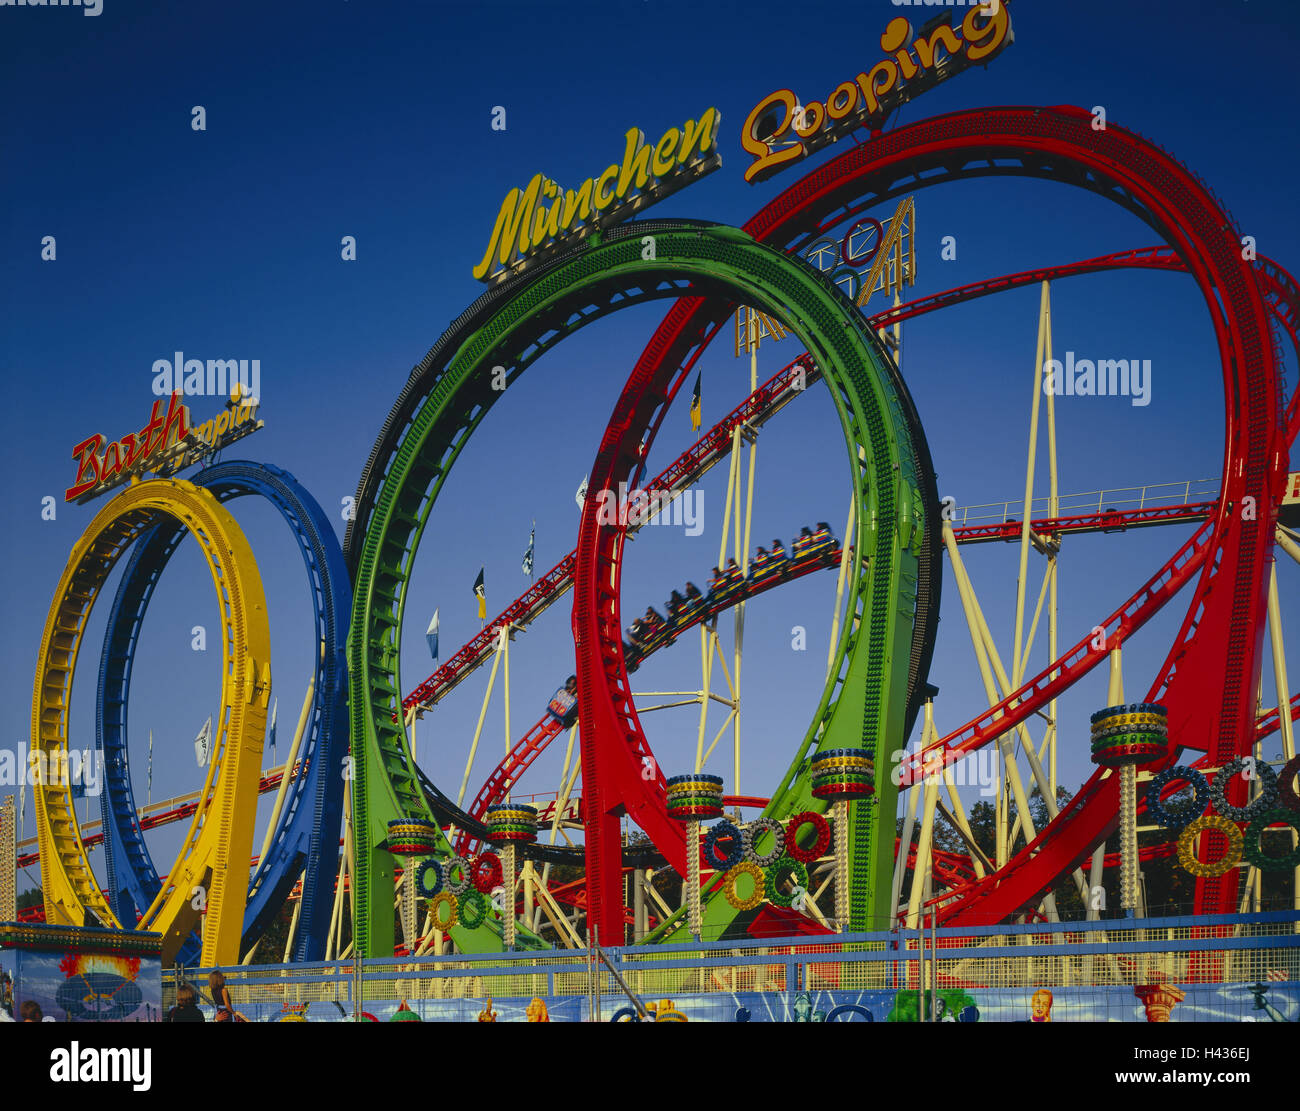 Germany, Bavaria, Munich, Oktoberfest, roller coaster, looping the loop, Upper Bavaria, Theresienwiese, feast, public festival, Wiesn, pleasure feast, fairground, tourism, attraction, world-renowned, famous, amusements, fun, meadow visit, driving business Stock Photo